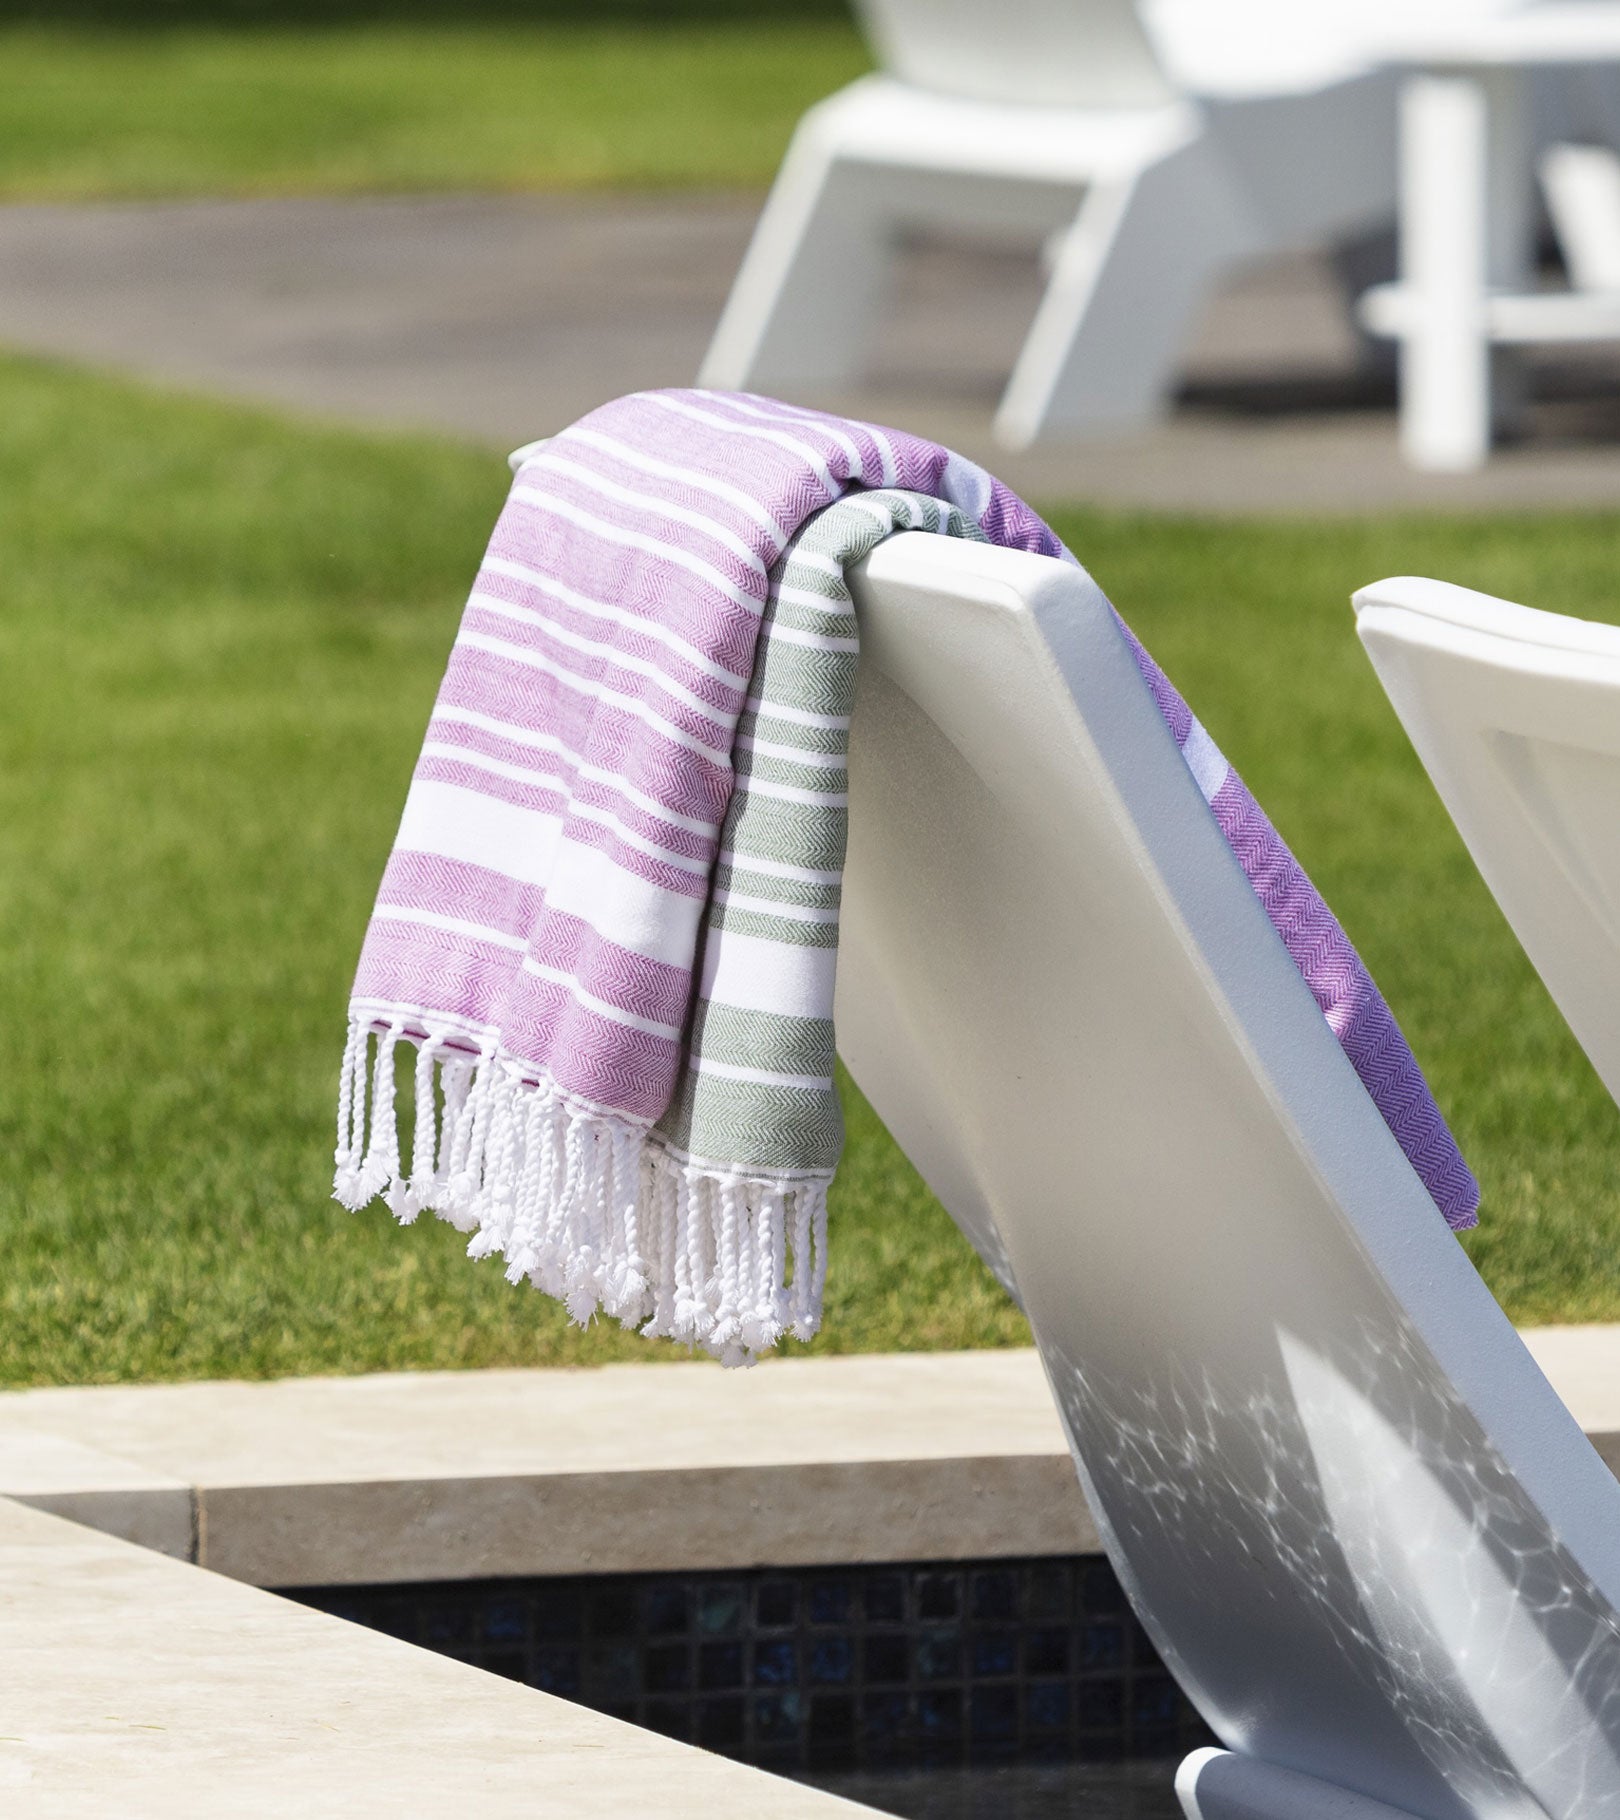 Averylily Swim, Surf + Sand Fouta Beach Towels in Orchid Pink and Palm Green.